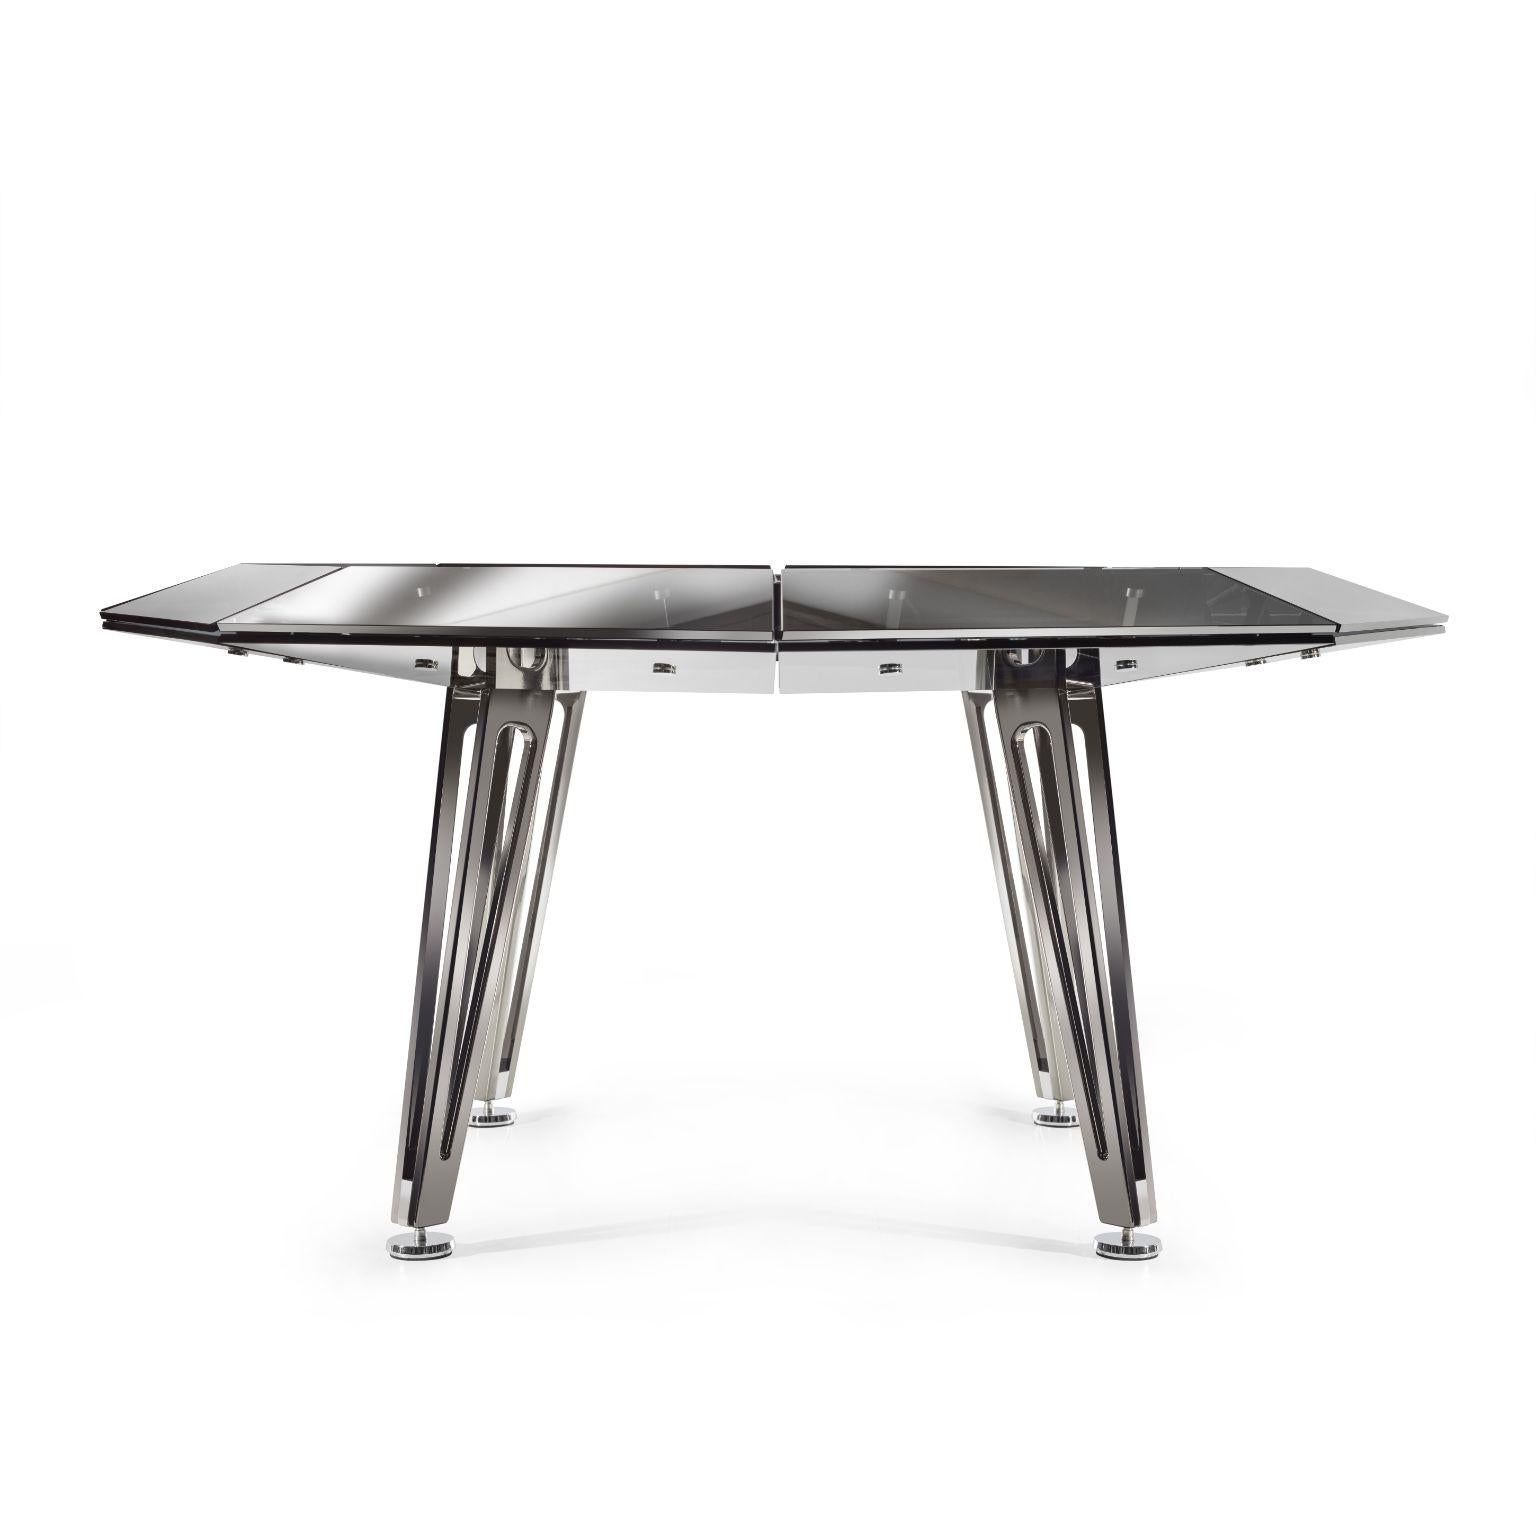 Post-Modern Unootto Black Marble 8 Players Poker Table by Impatia